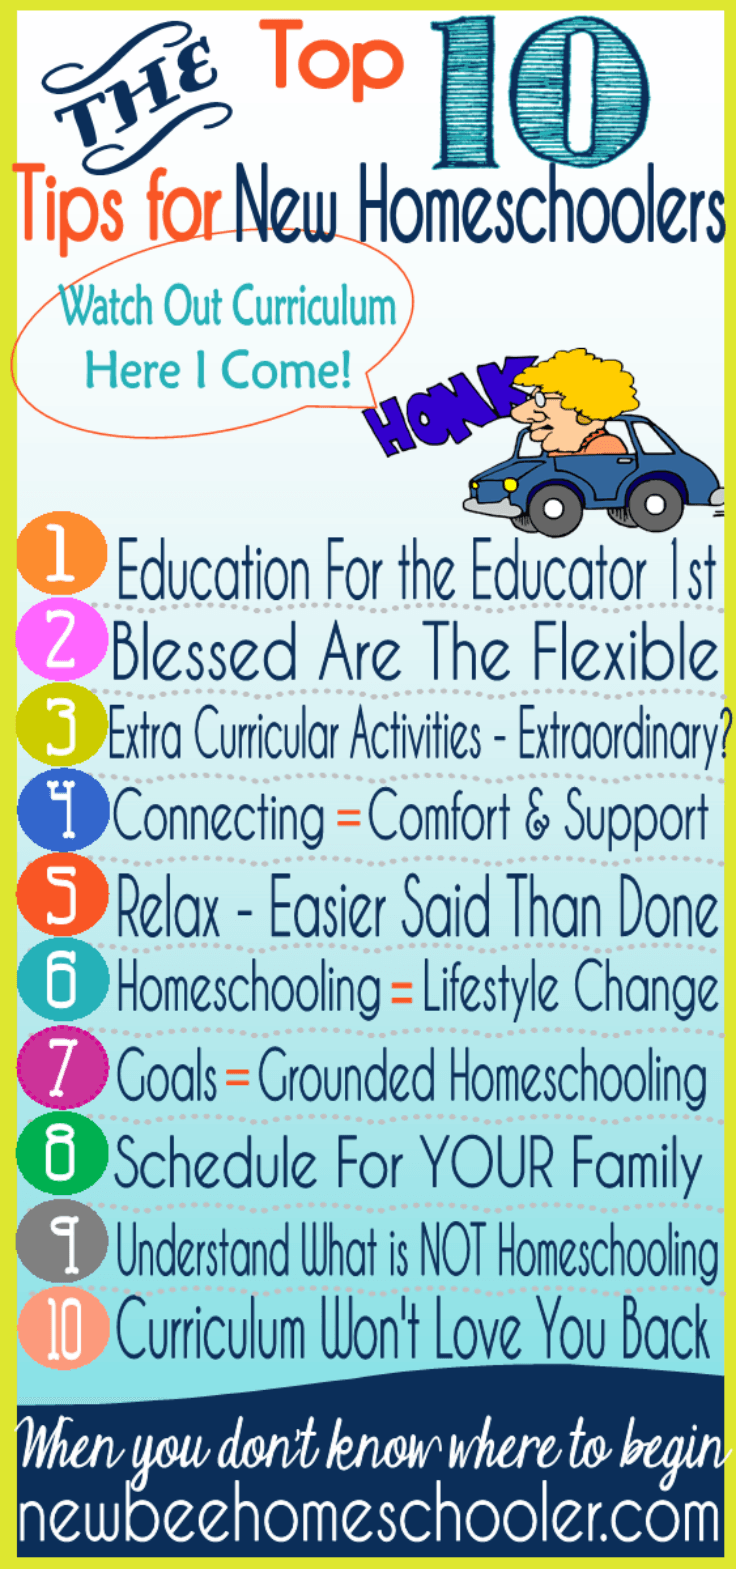 Top 10 Tips for New Homeschoolers Part 2 @ Tinas Dynamic Homeschool Plus